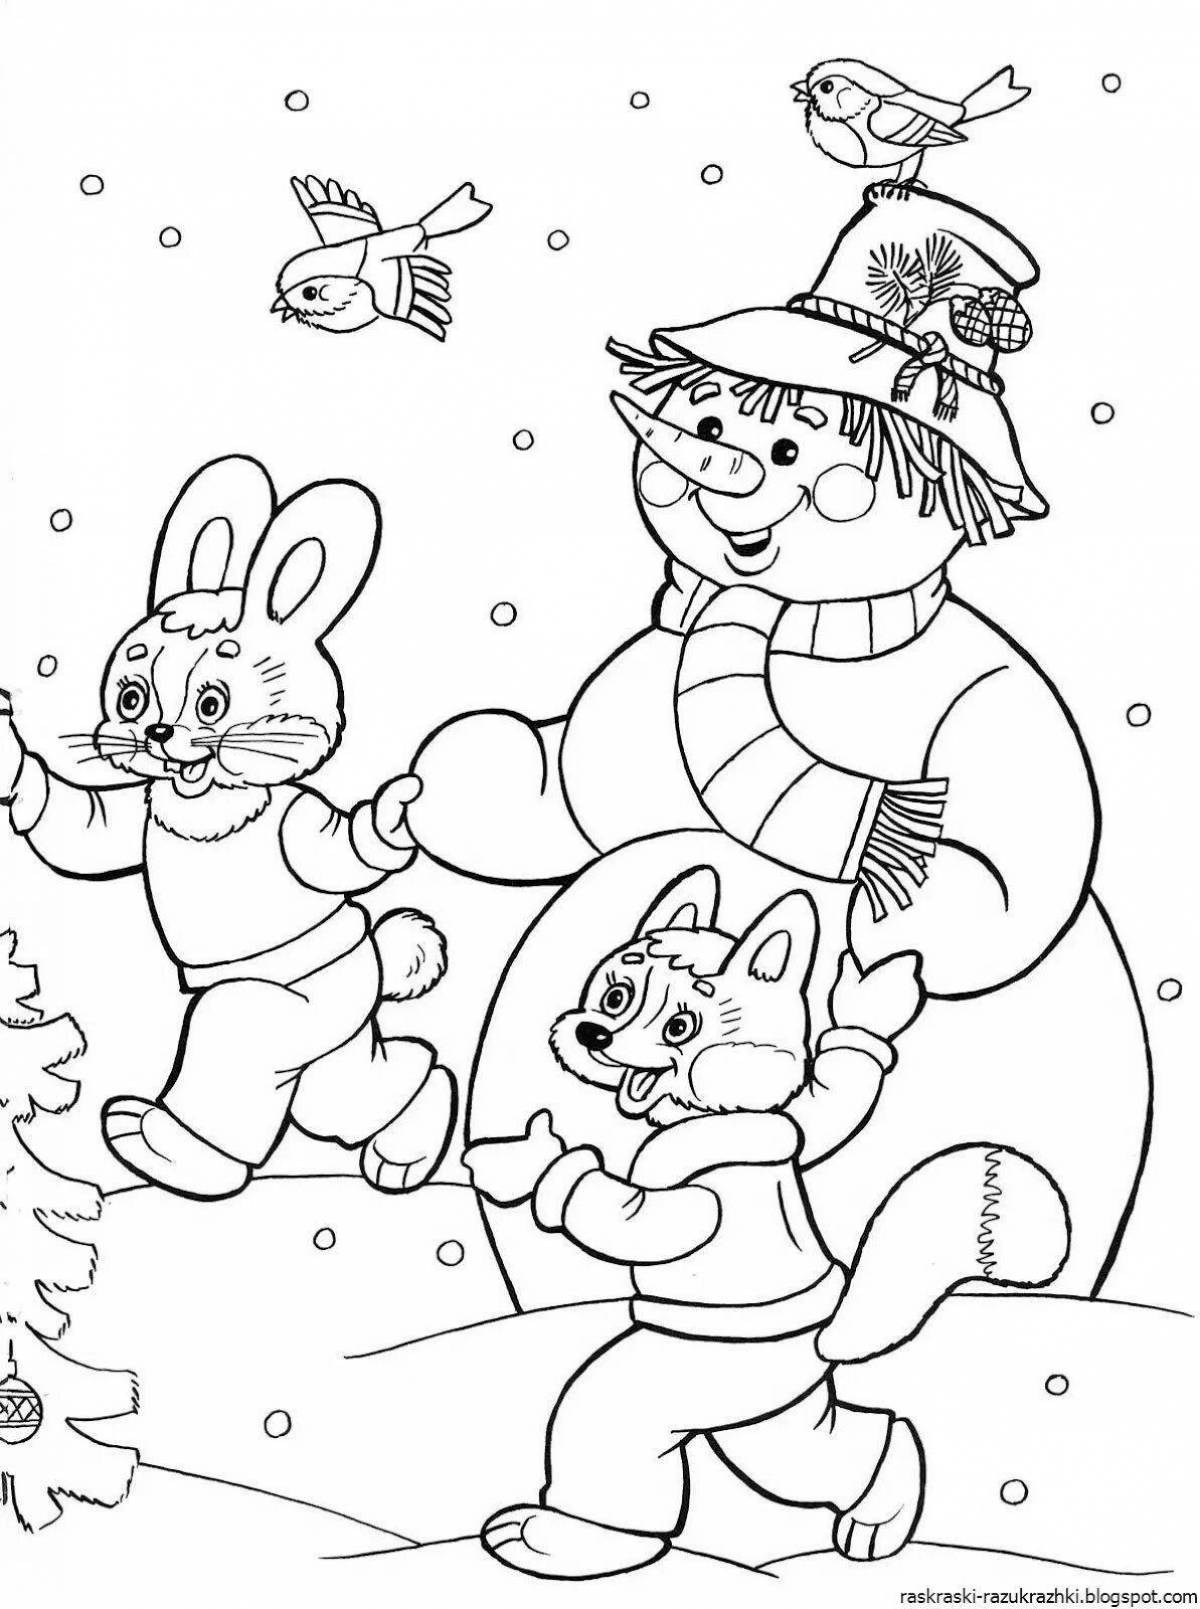 Exquisite winter coloring book for kids